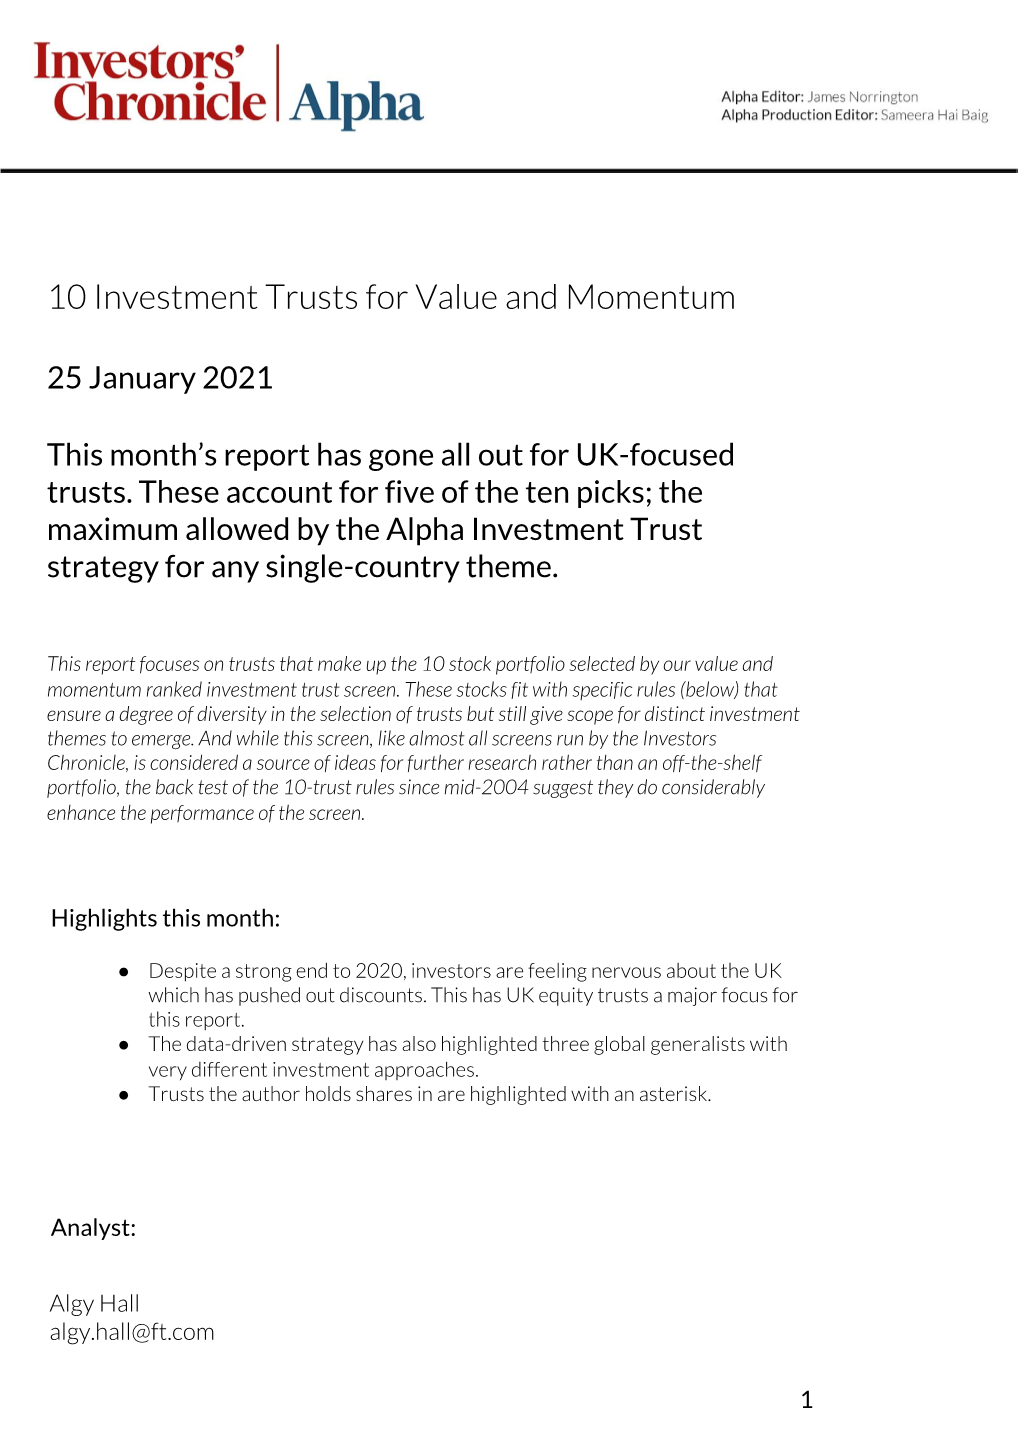 10 Investment Trusts for Value and Momentum